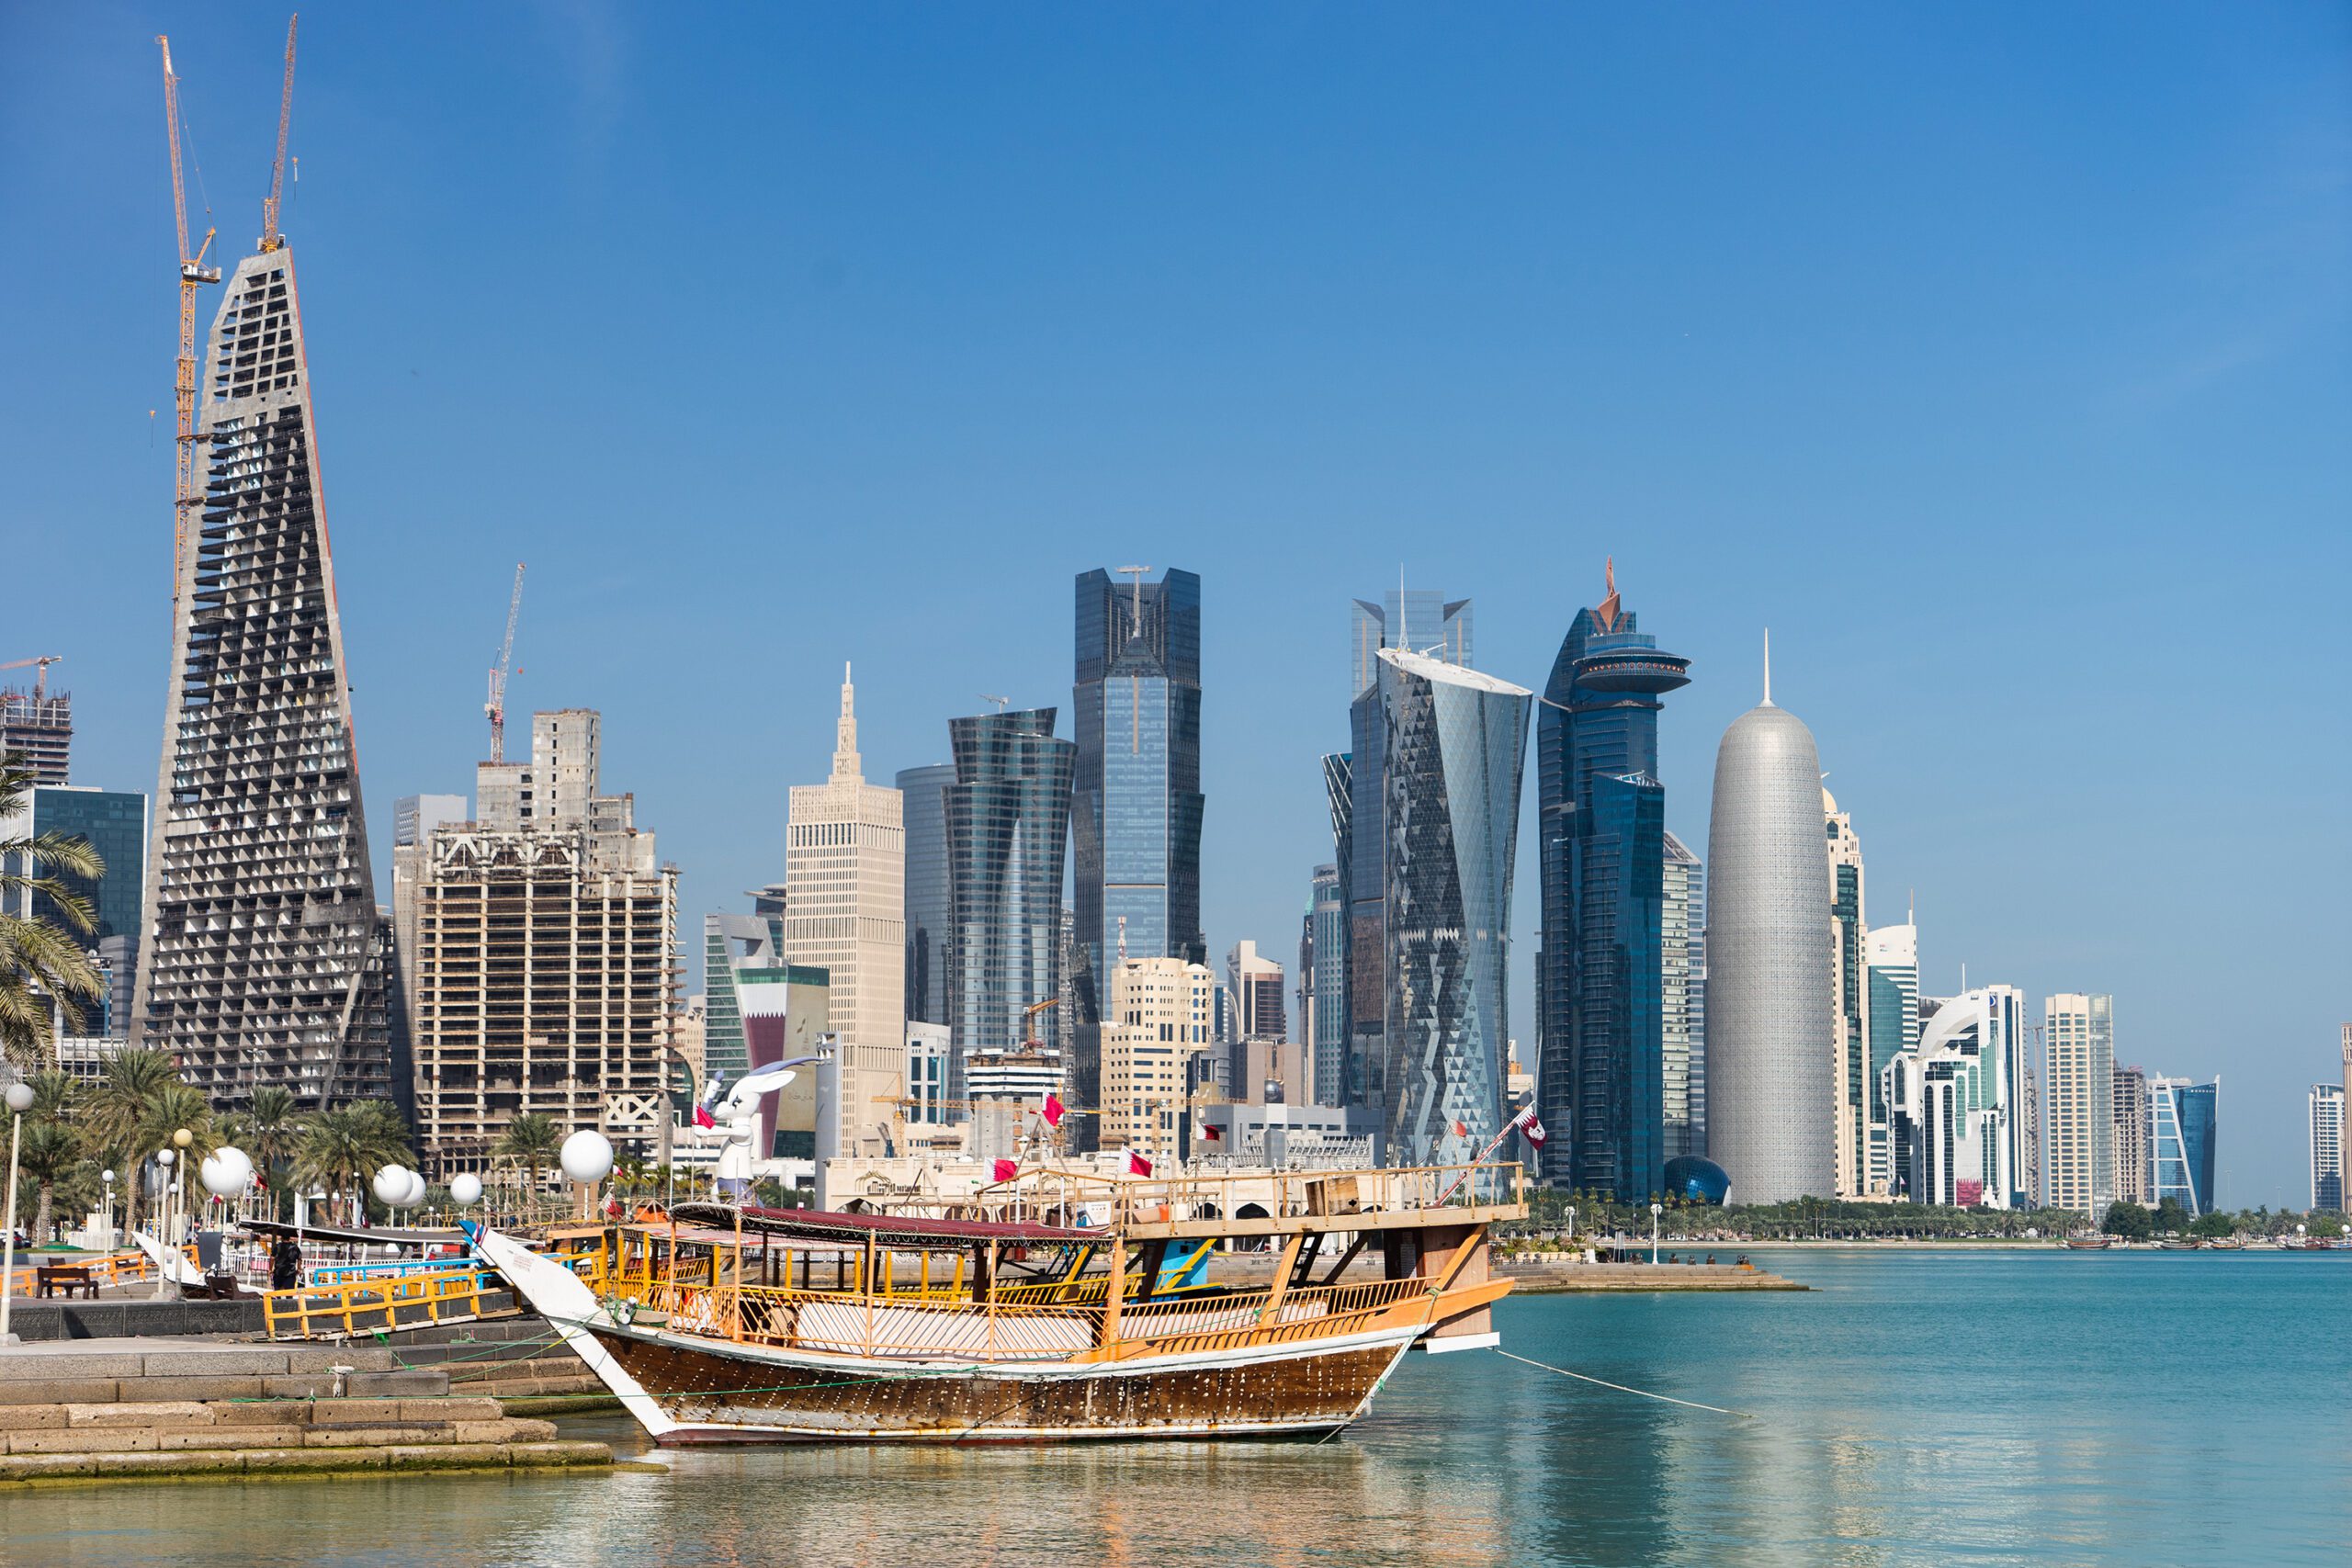 Skyscrapers in the city center with water and boat foreground of Doha, Qatar 2020.